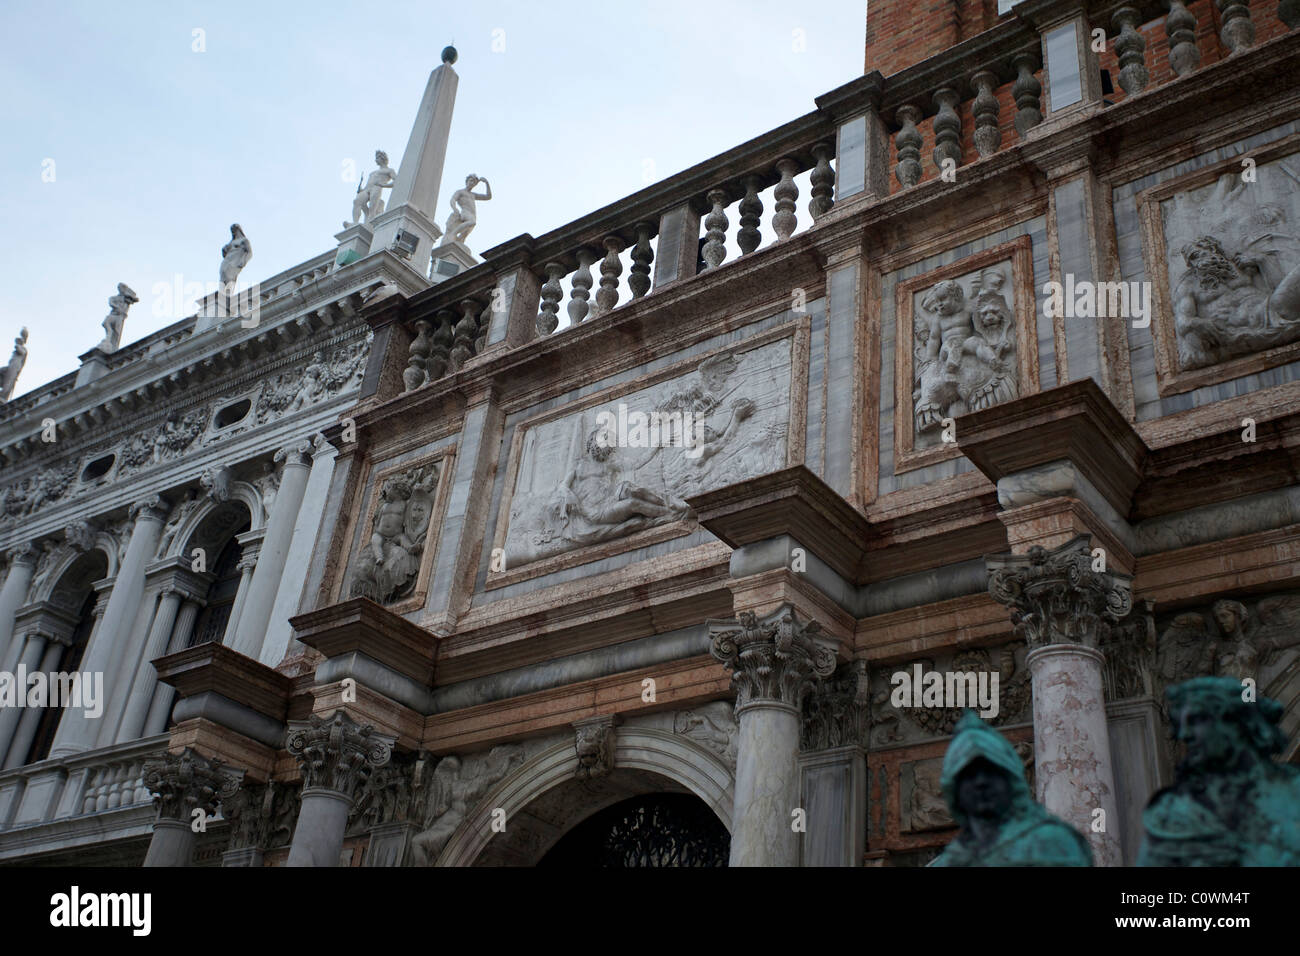 Examples of architecture in Venice, Italy Stock Photo